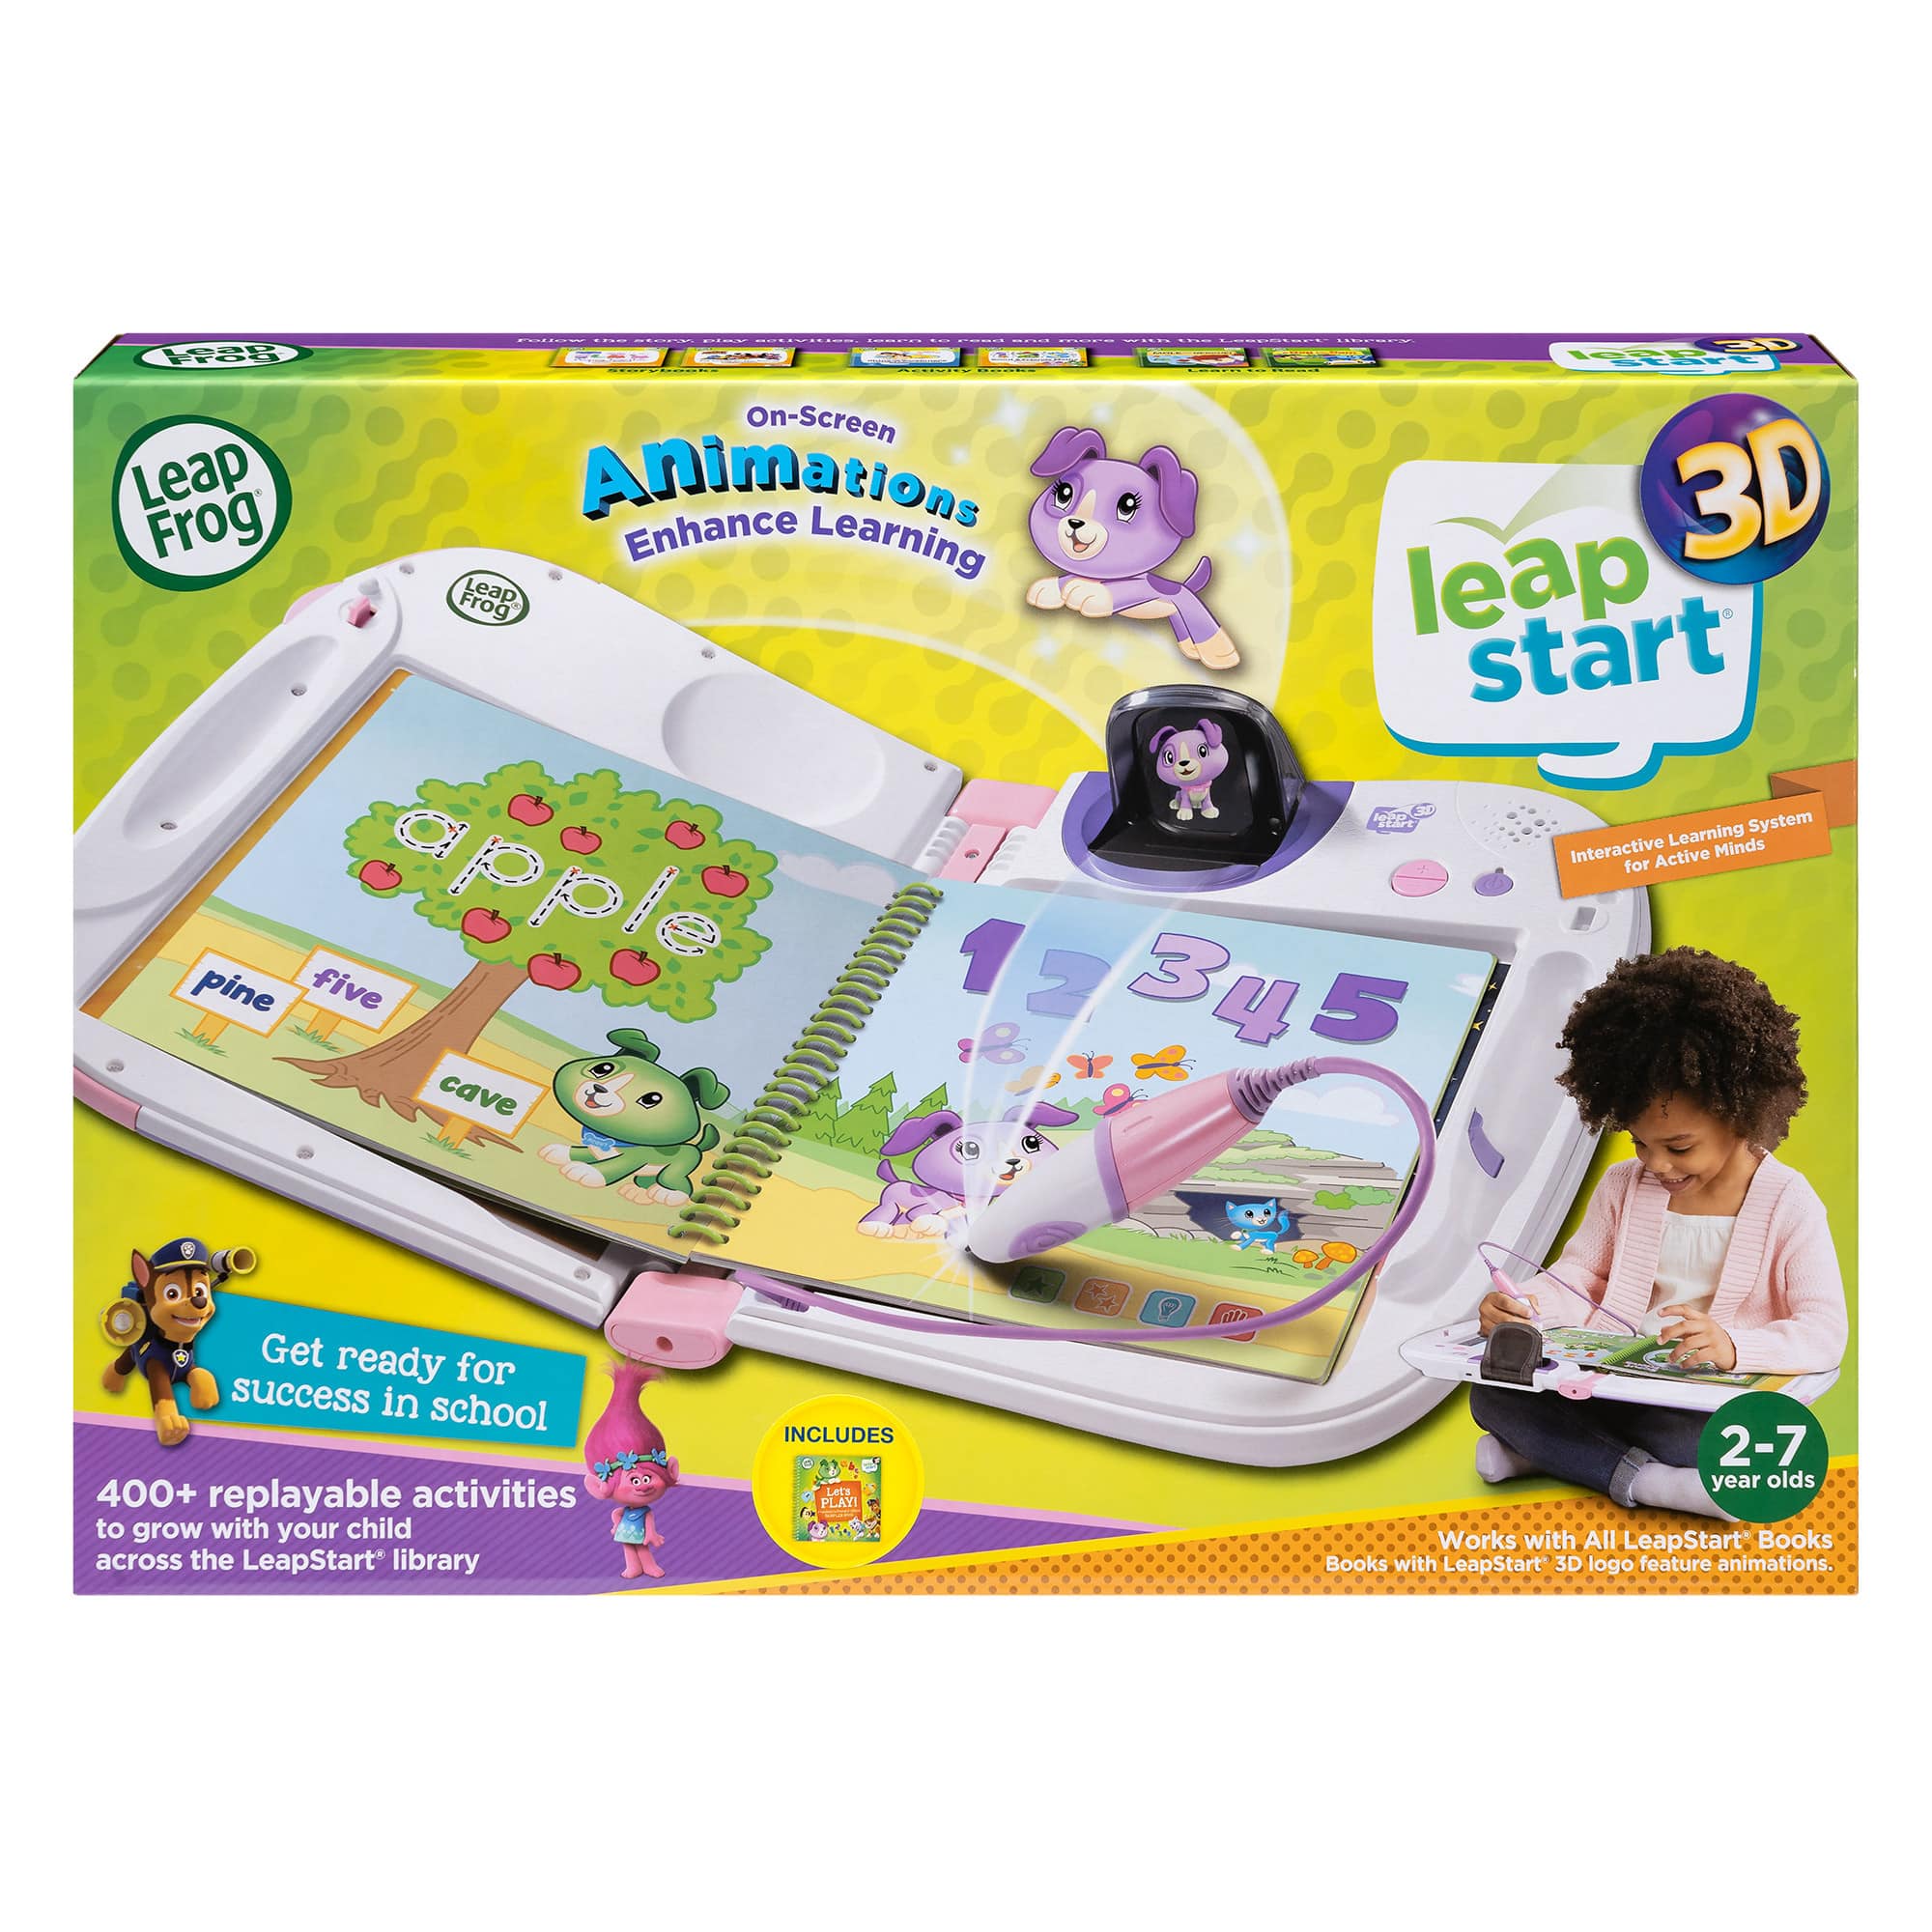 LeapFrog - LeapStart 3D Interactive Learning System - Pink